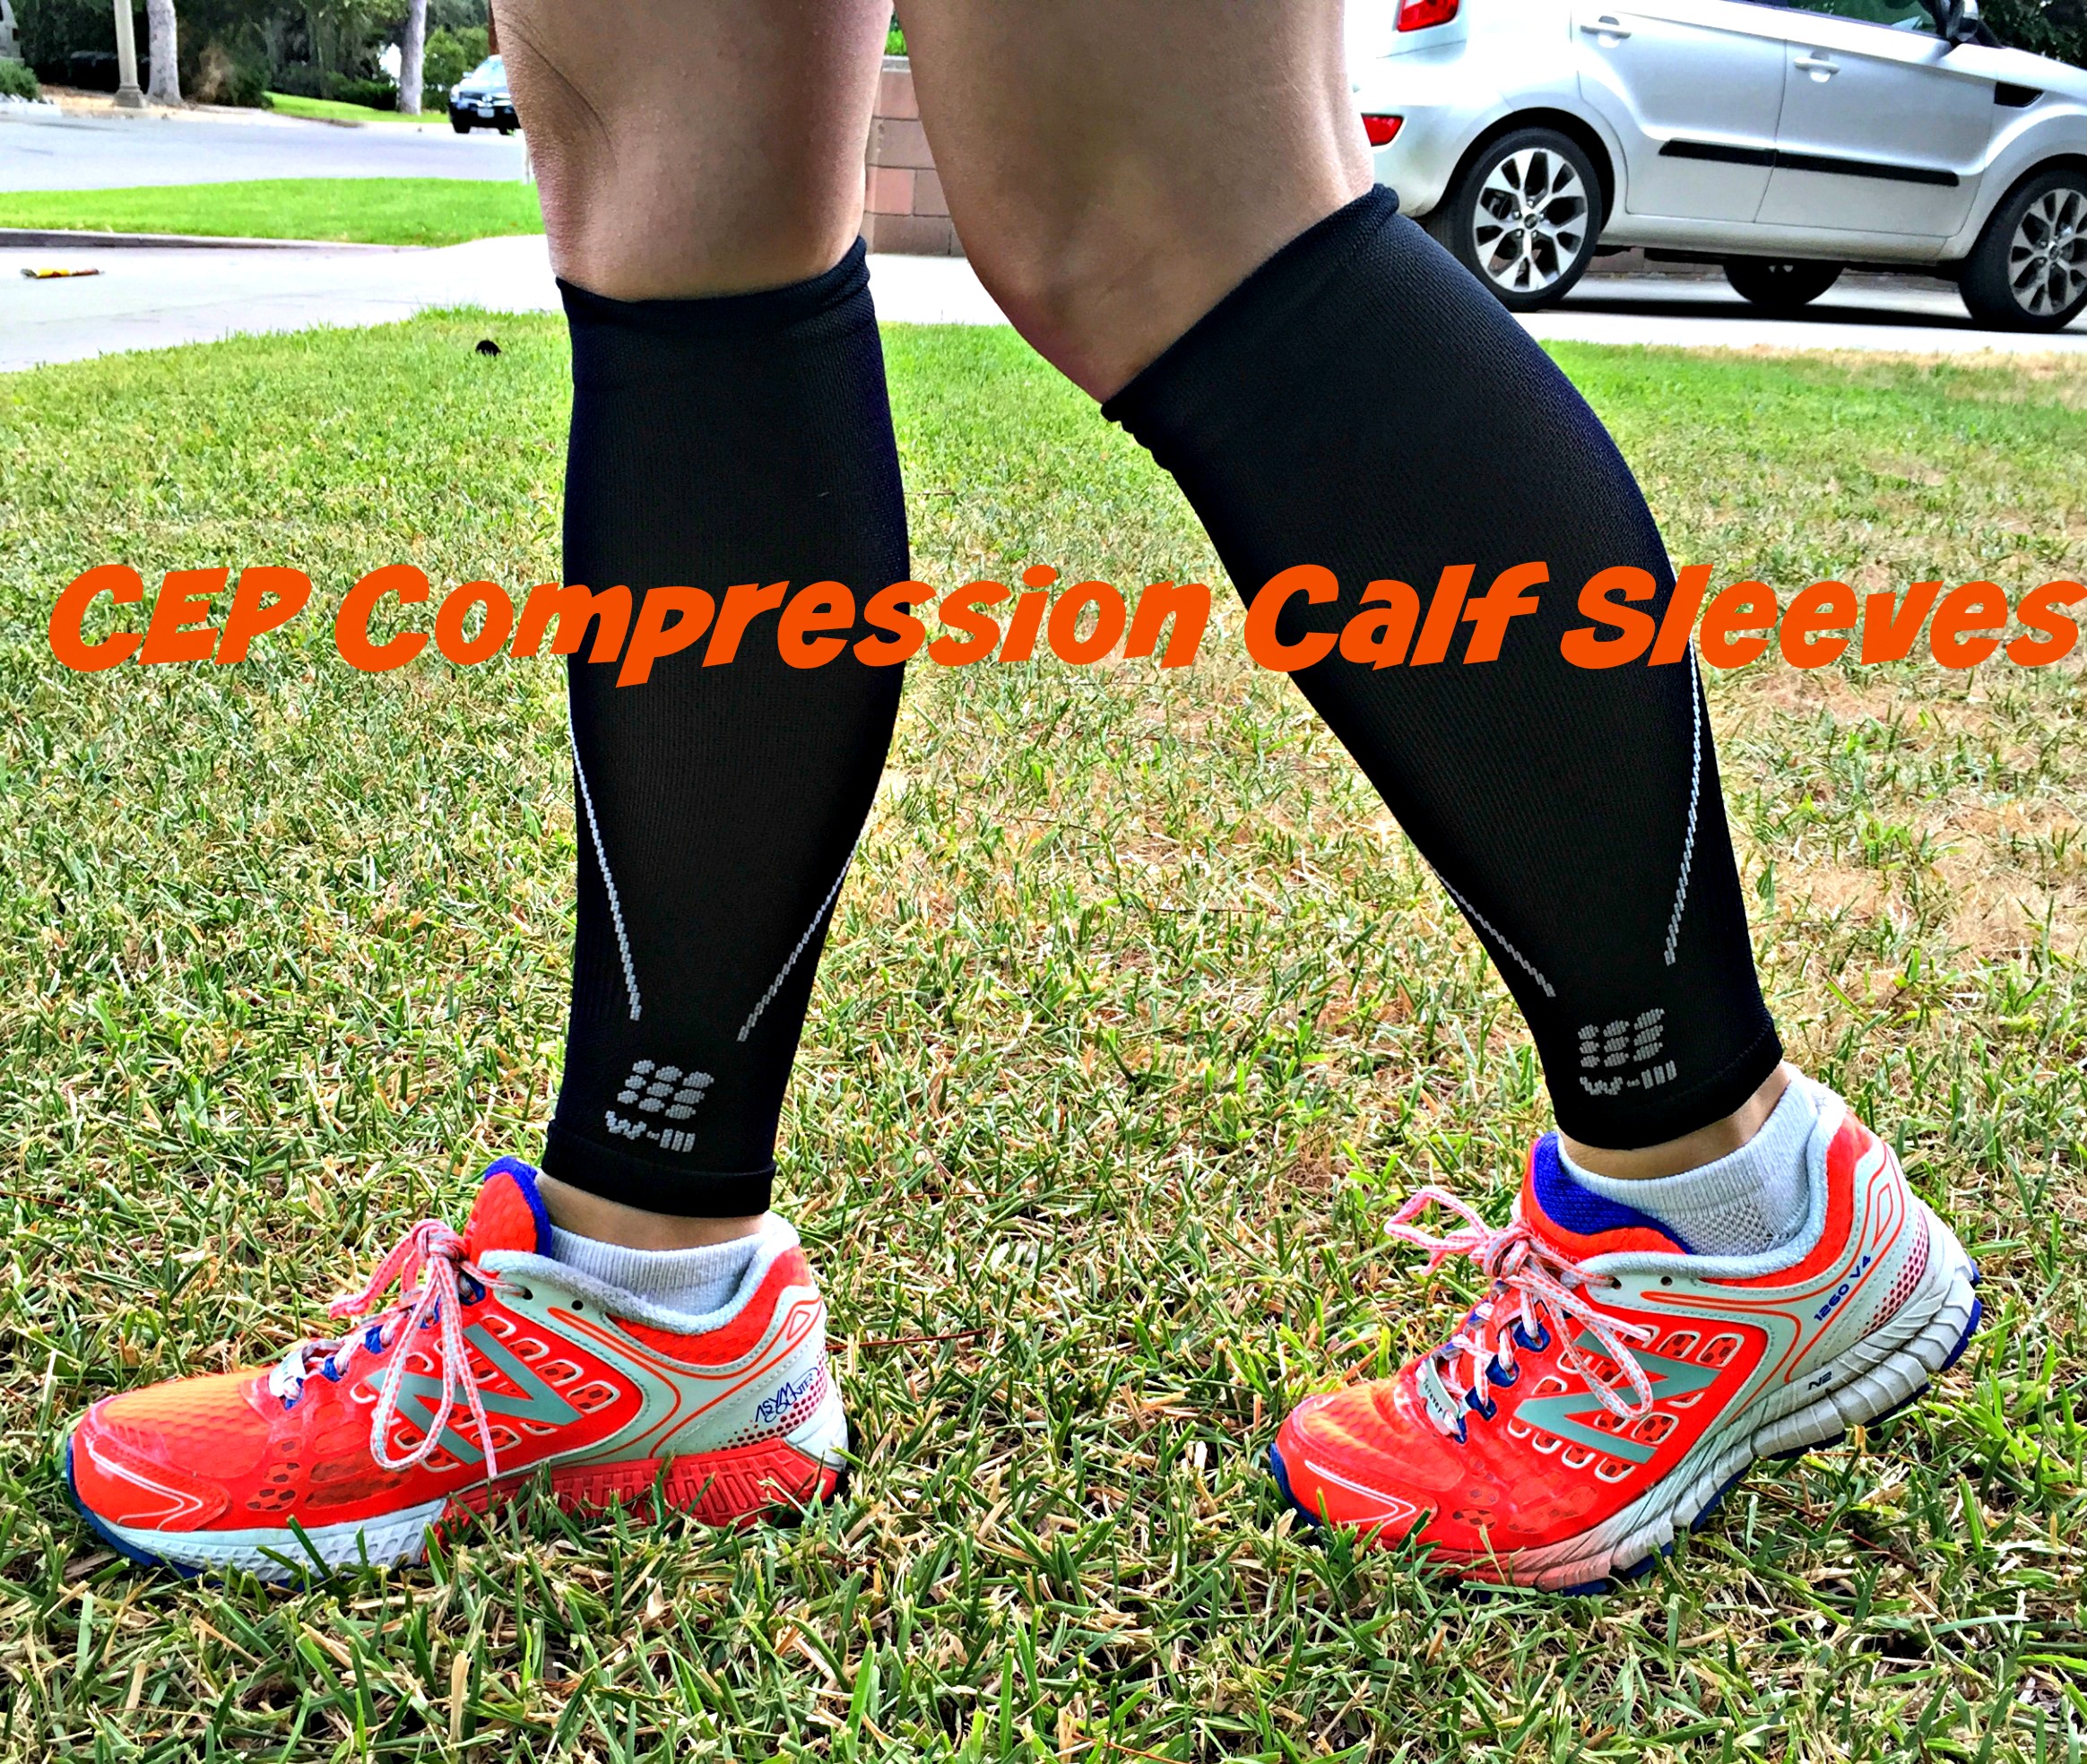 CEP Compression Socks and Calf Sleeves